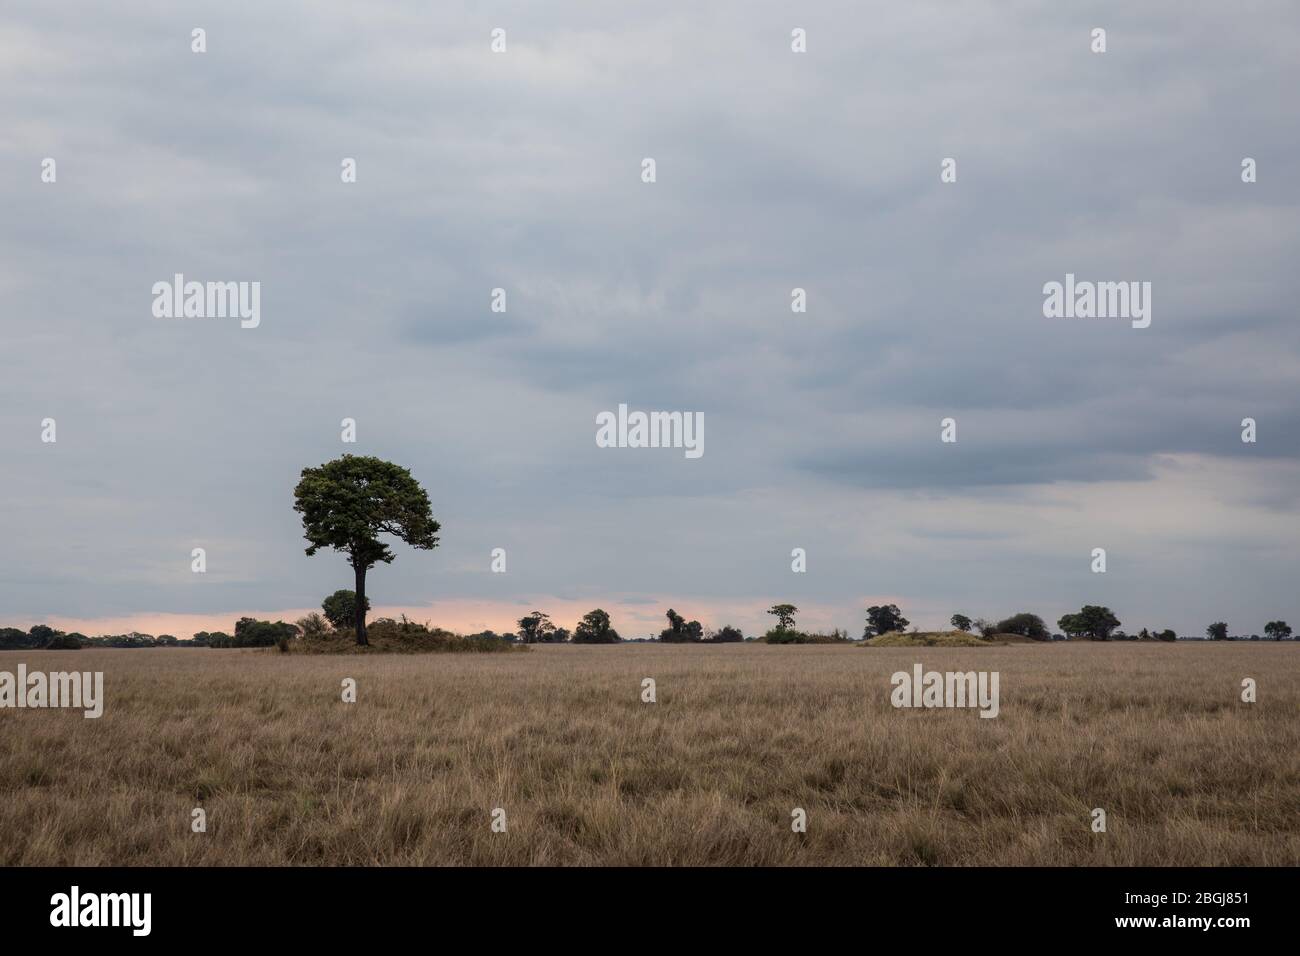 Tree and grasslands in scenic savanna landscape, Busanga Plains, Kafue National Park, North Western Province, Zambia. Stock Photo